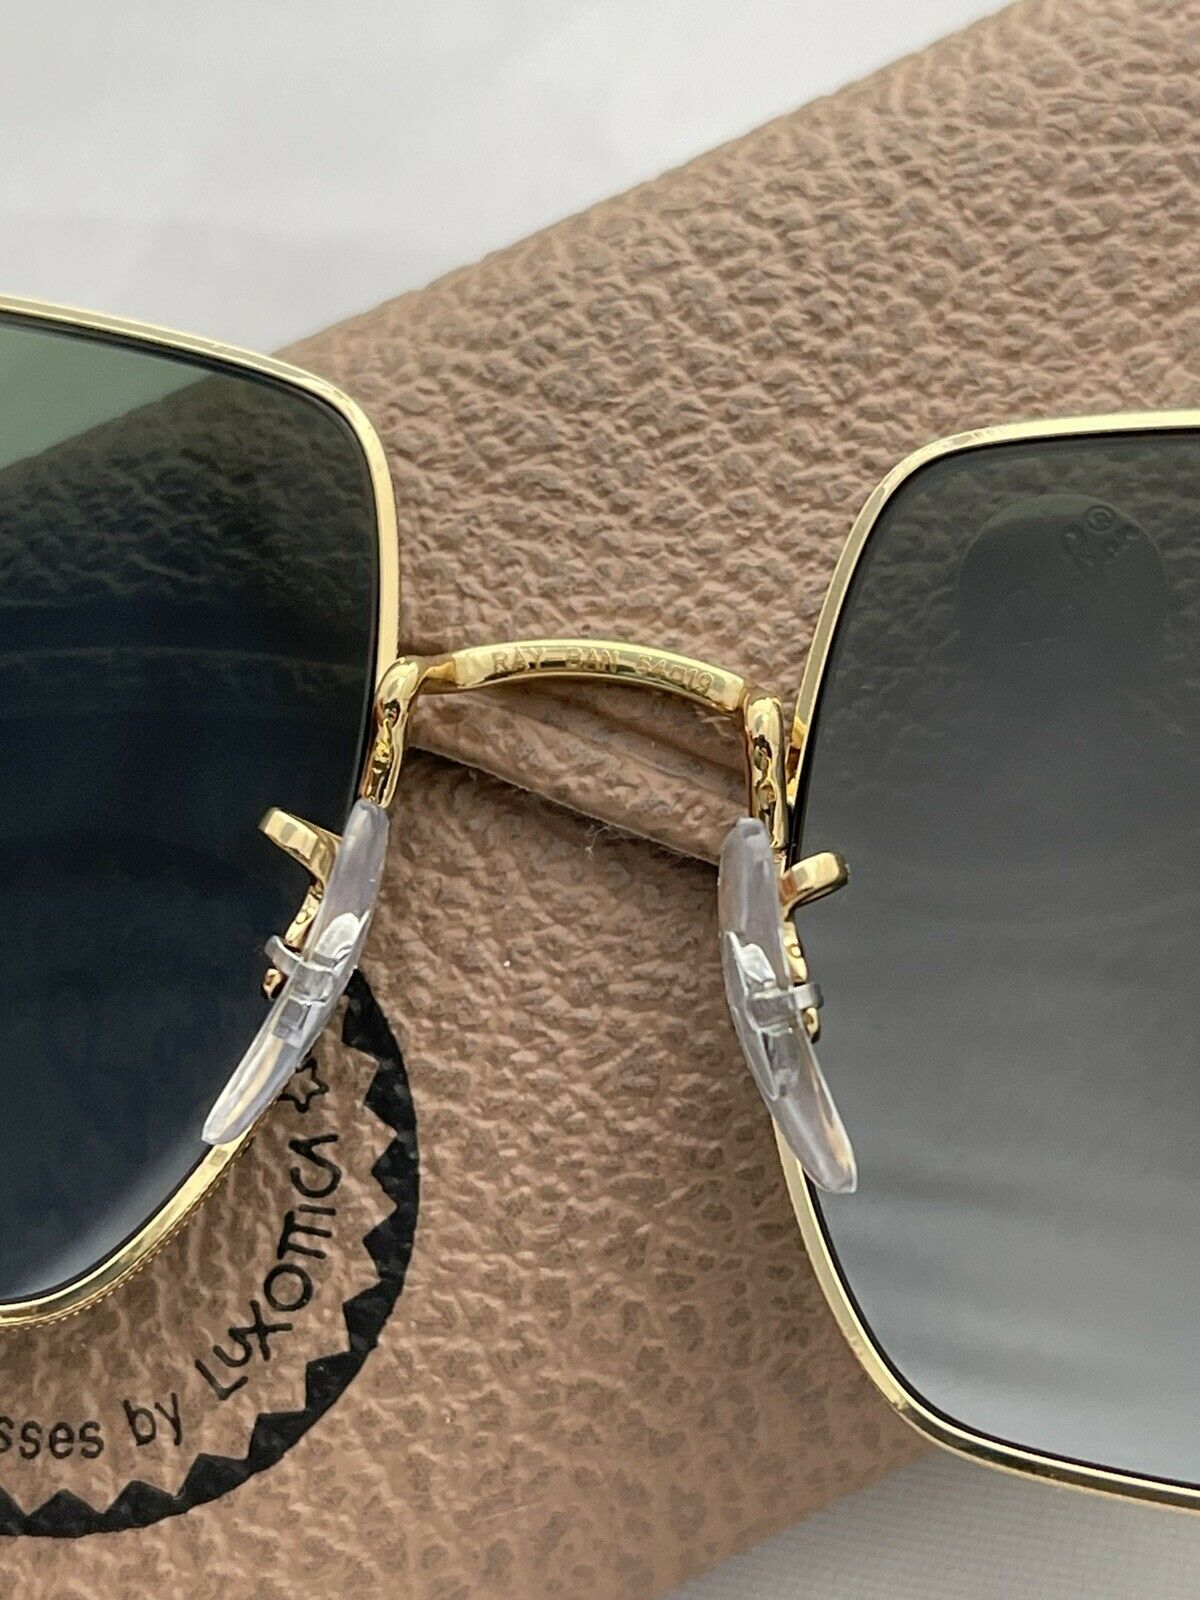 Ray-Ban SQUARE RB 1971 Gold/Green (9147/31) Sunglasses